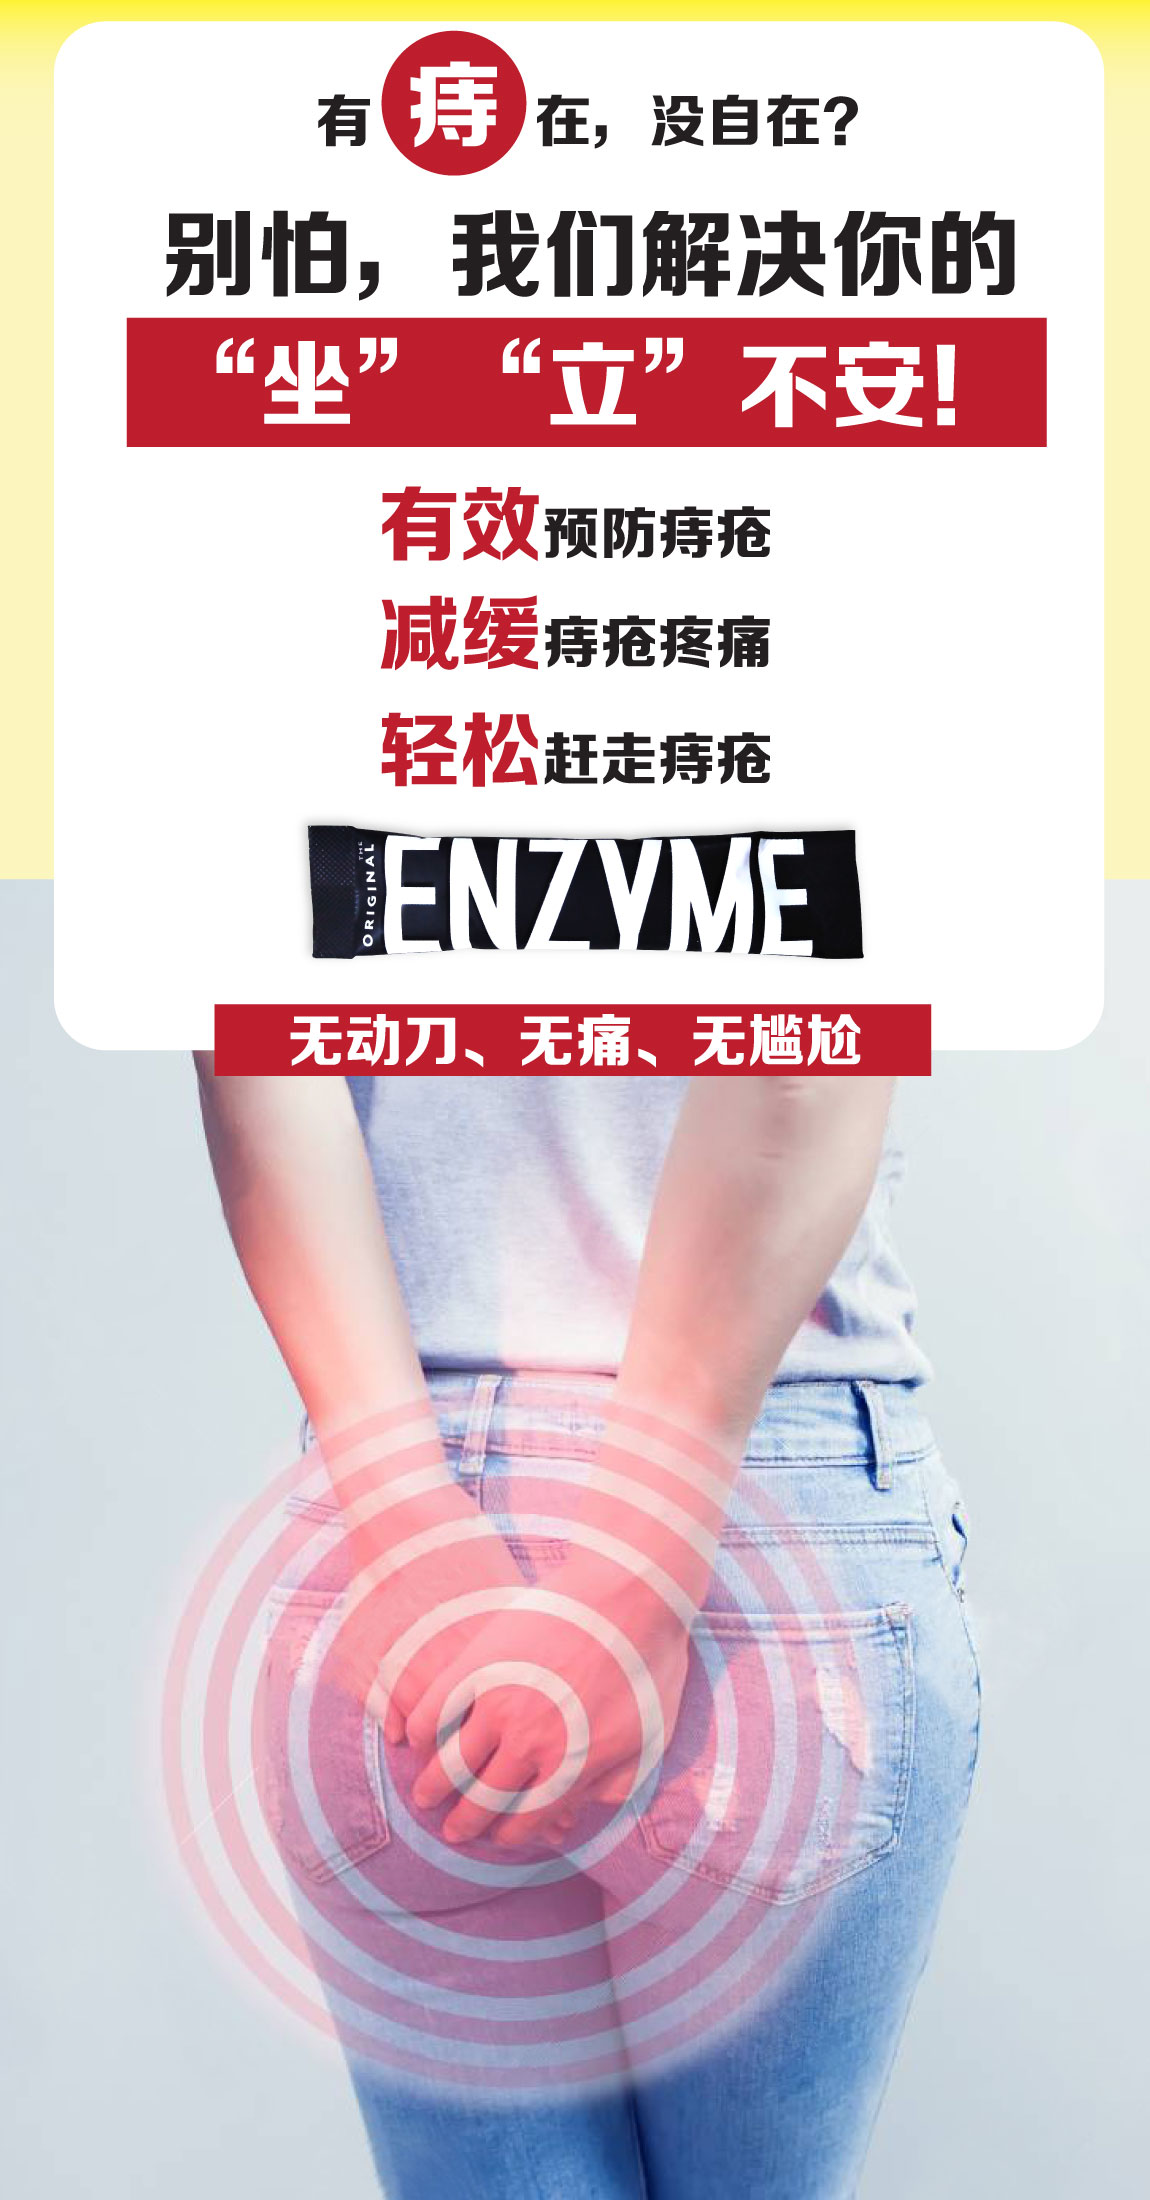 TO.ENZYME_赶走痔疮_mobile